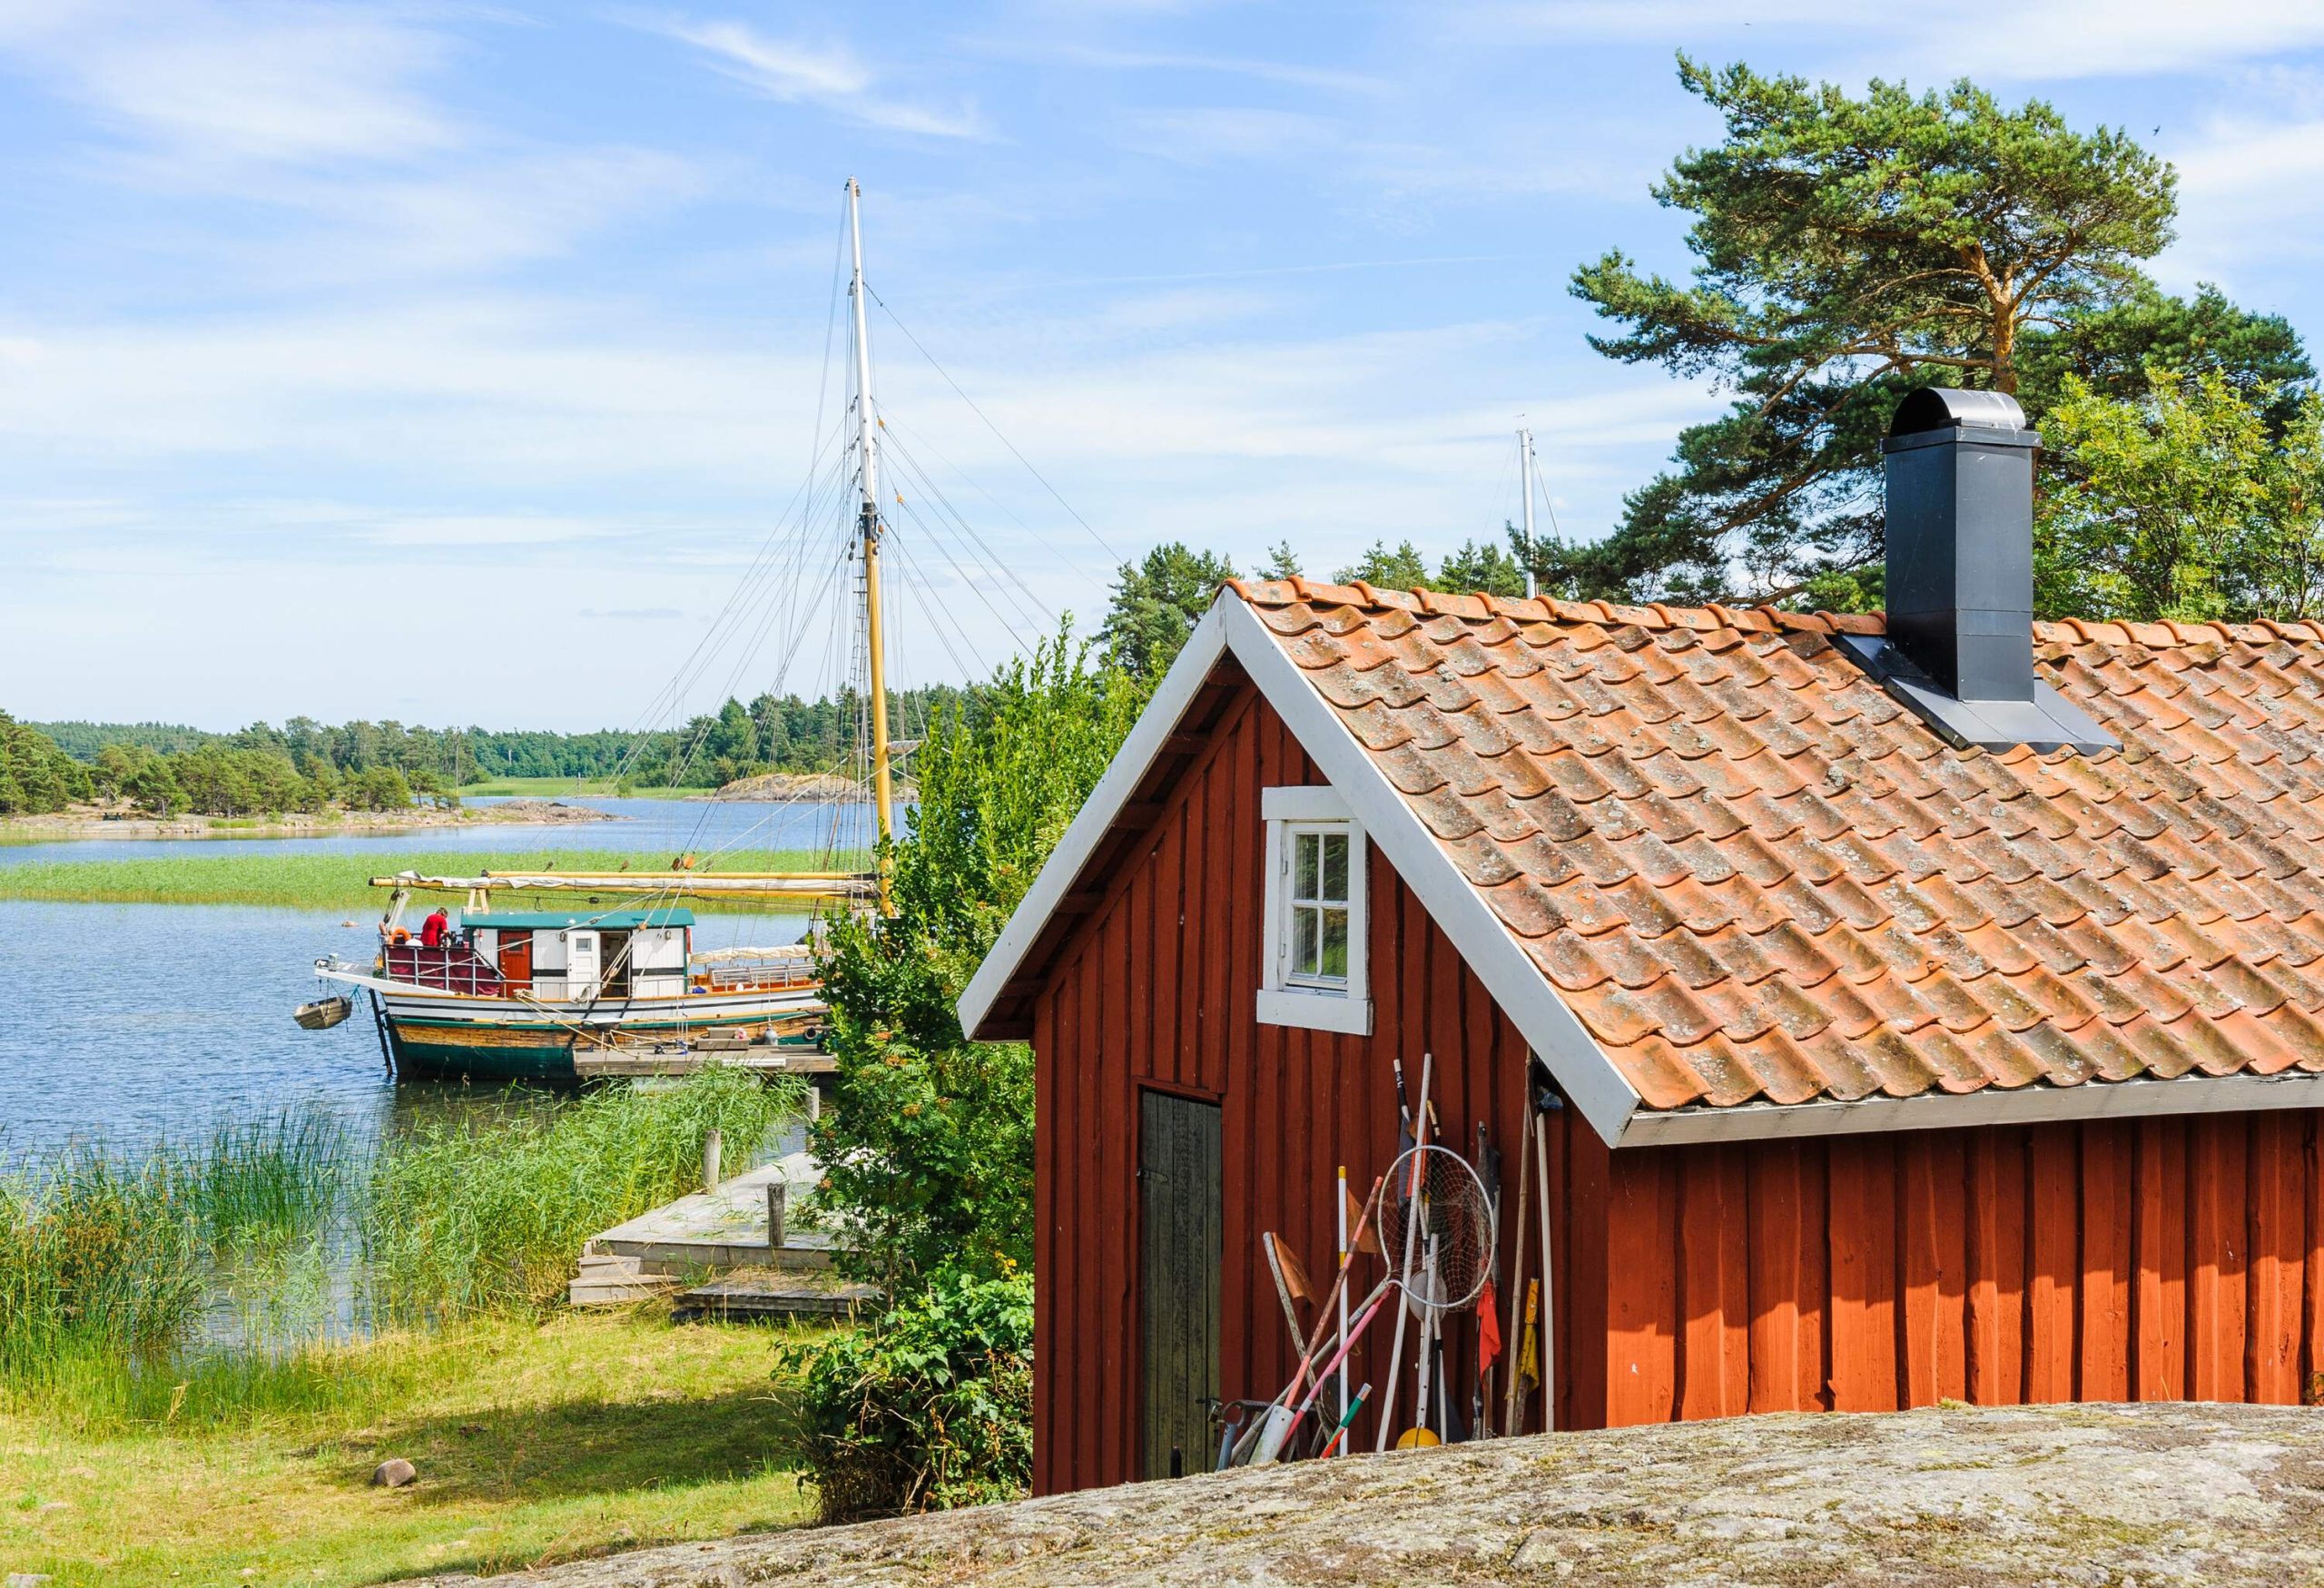 A red shack by a lake with a fishing boat docked nearby.